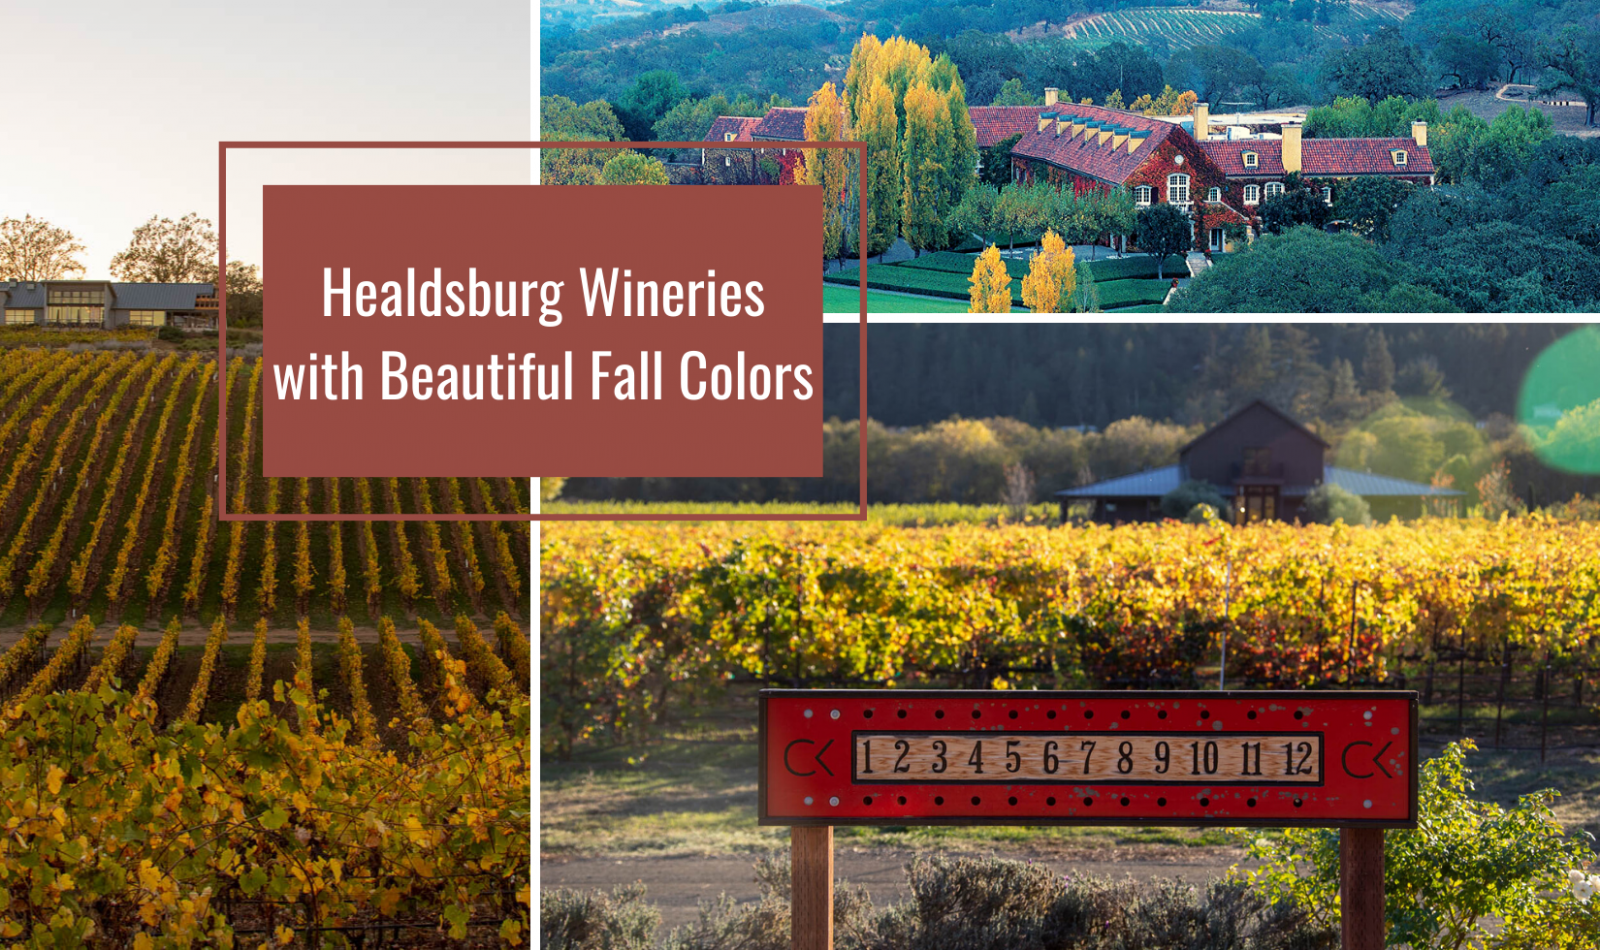 photo collage of Healdsburg Wineries with Beautiful Fall Colors with image text "Healdsburg wineries with beautiful fall colors"